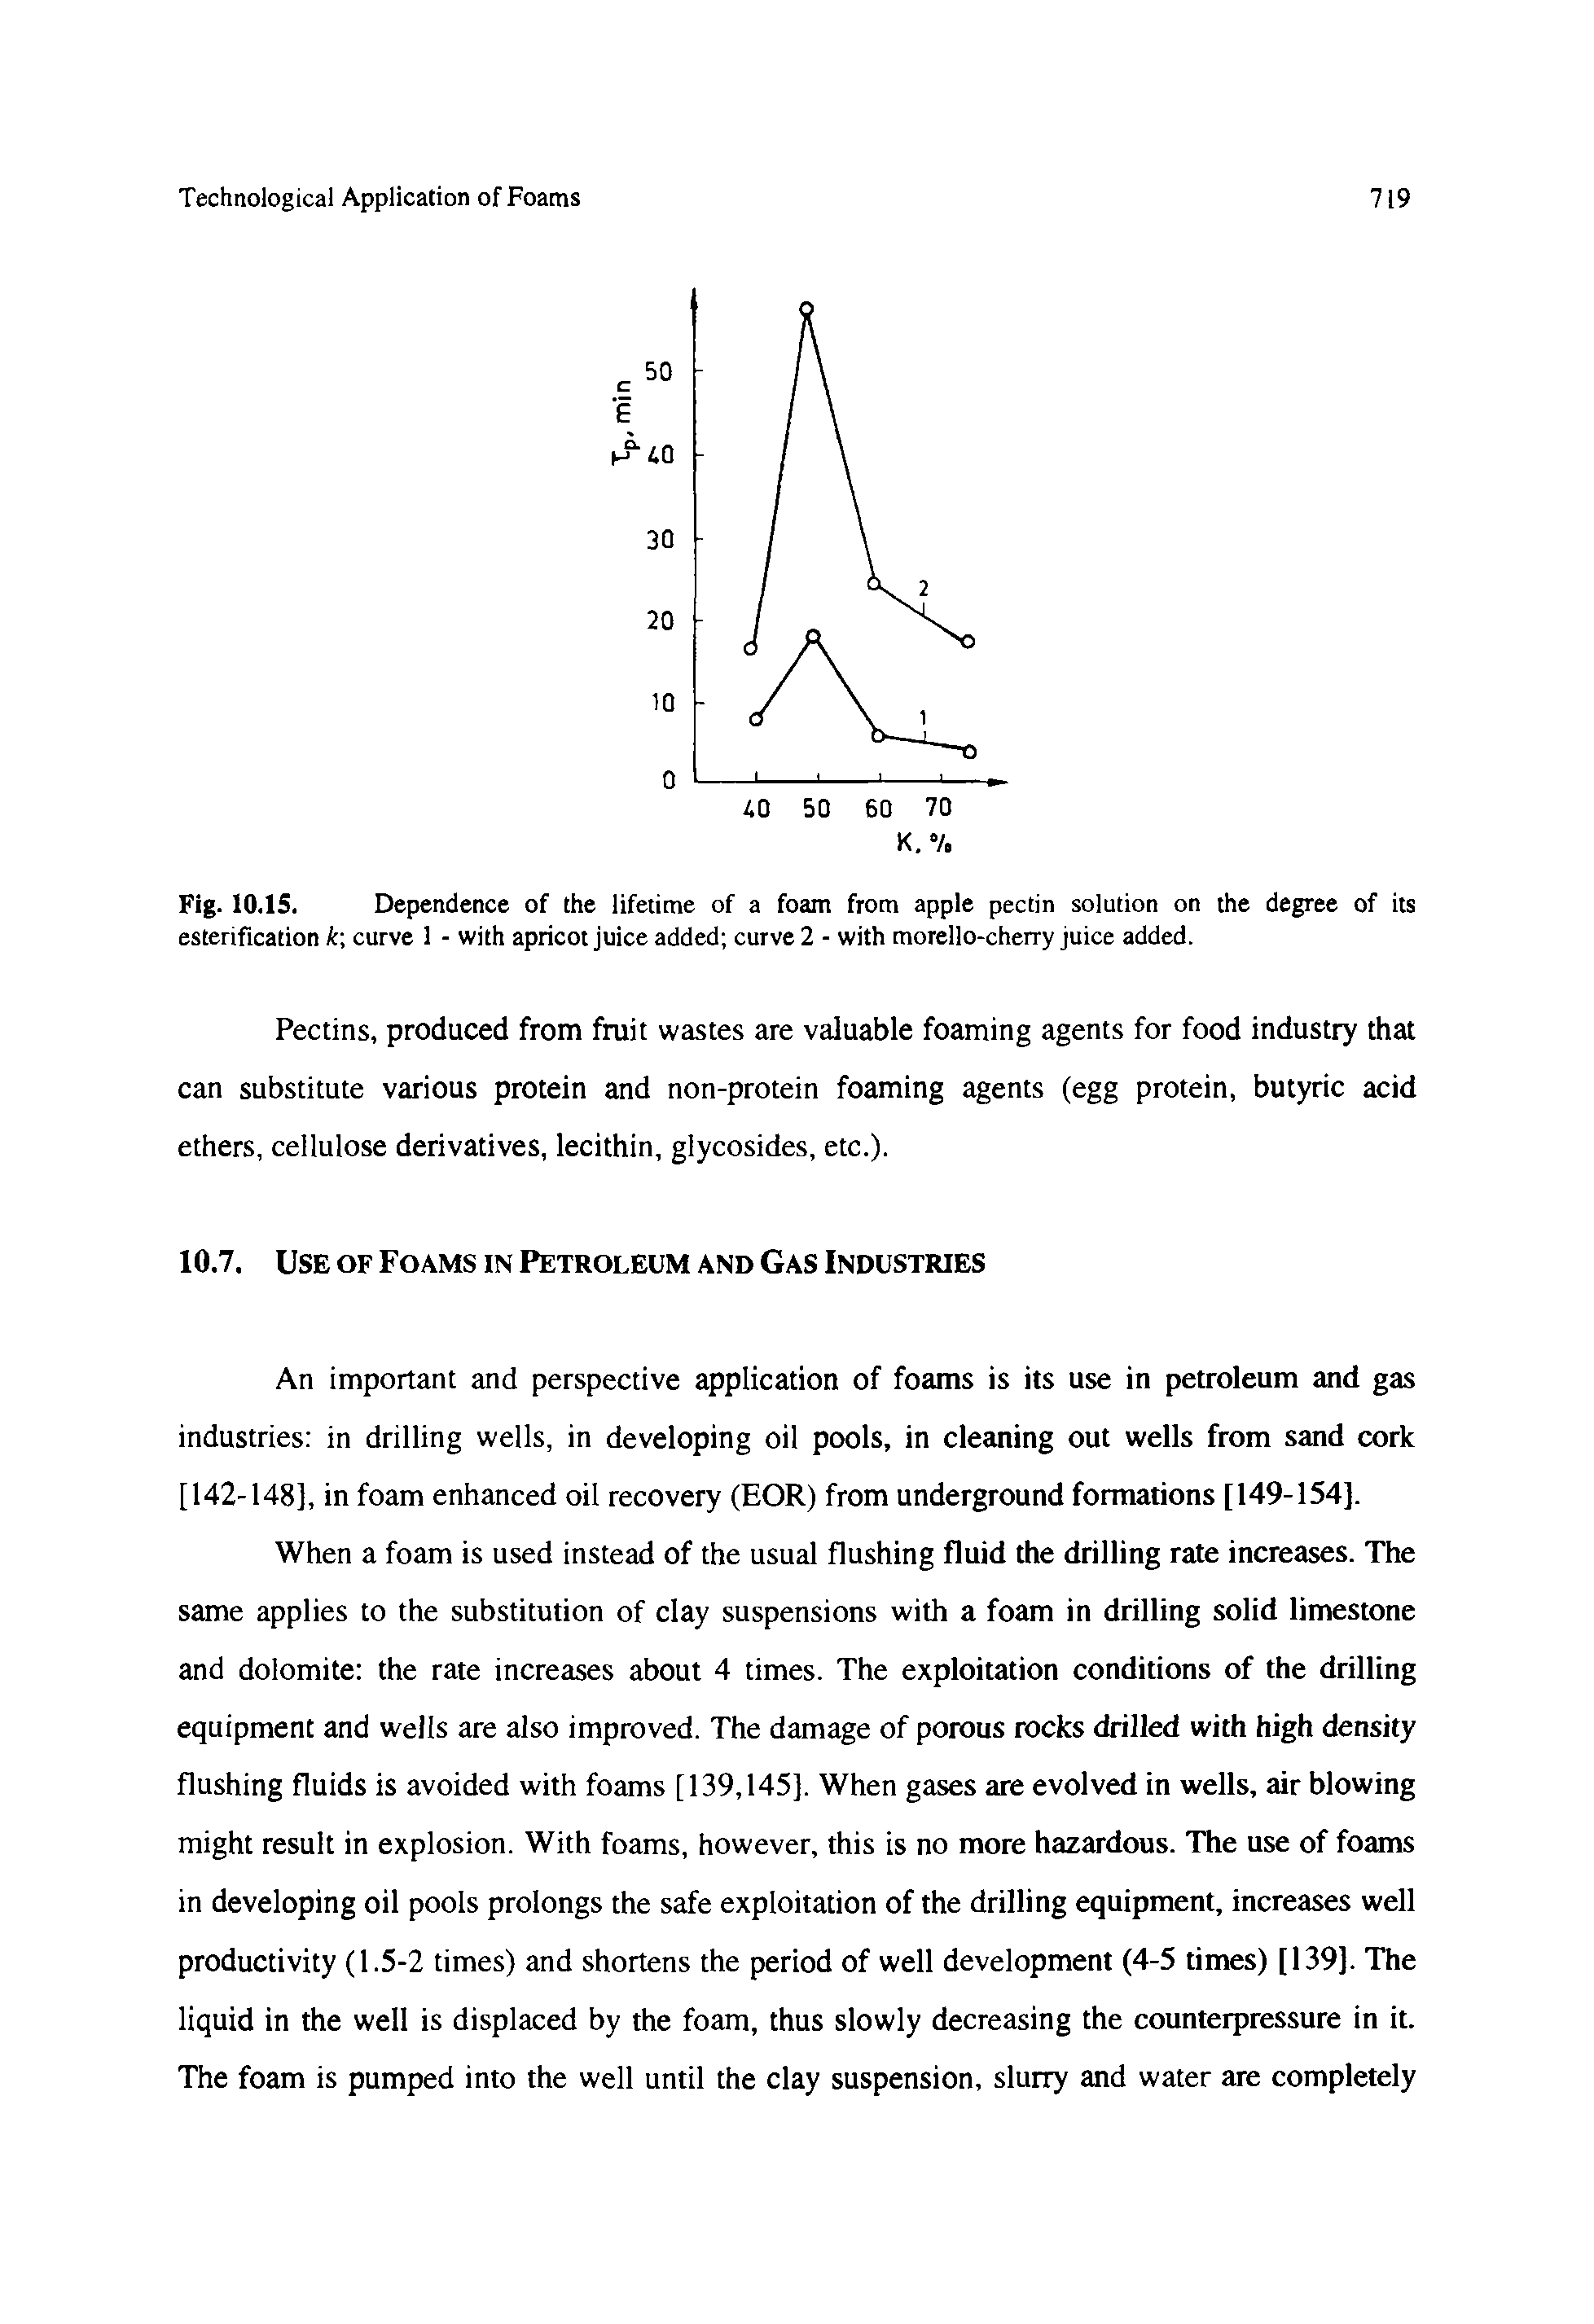 Fig. 10.15. Dependence of the lifetime of a foam from apple pectin solution on the degree of its esterification k curve 1 - with apricot juice added curve 2 - with morello-cherry juice added.